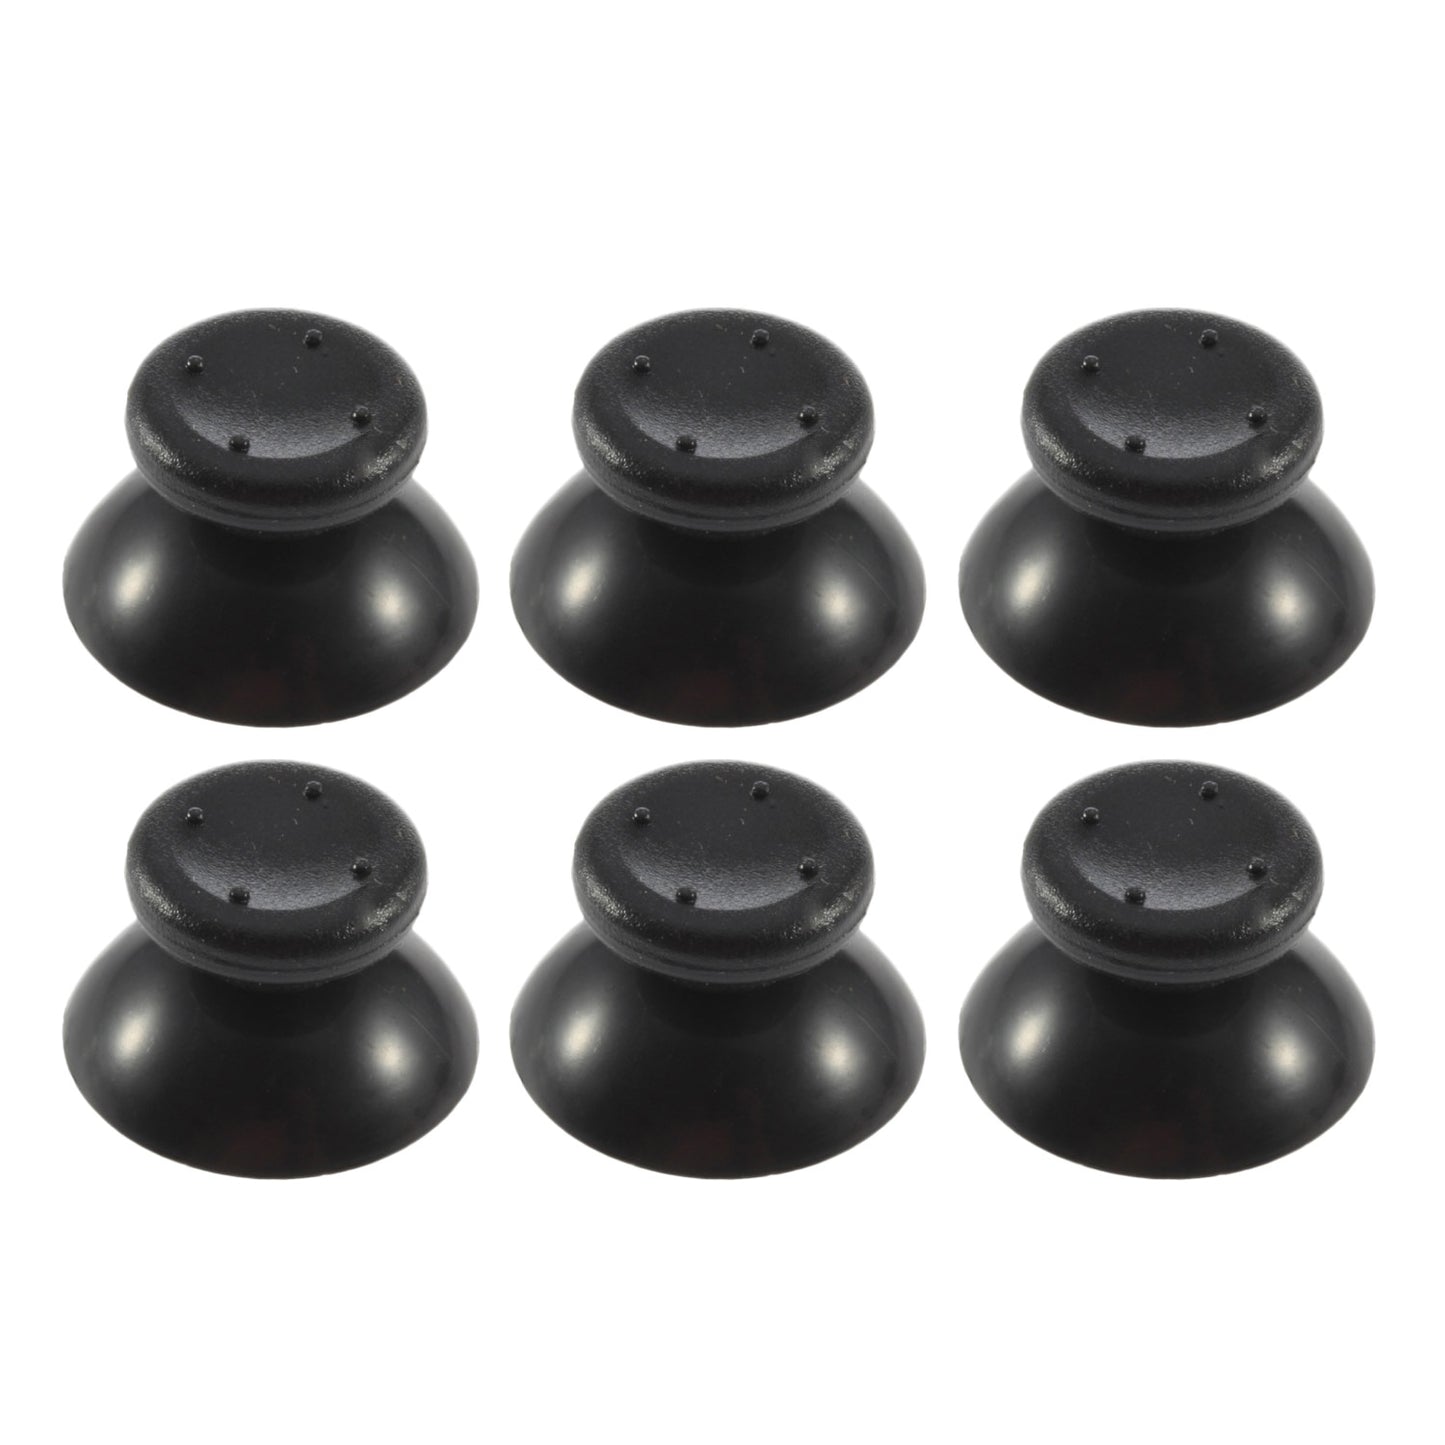 Bevigac 6PCS Plastic Replacement Thumb Stick Joystick Caps Grips Covers for XBOX 360 XBOX360 Controller Gamepads Accessories